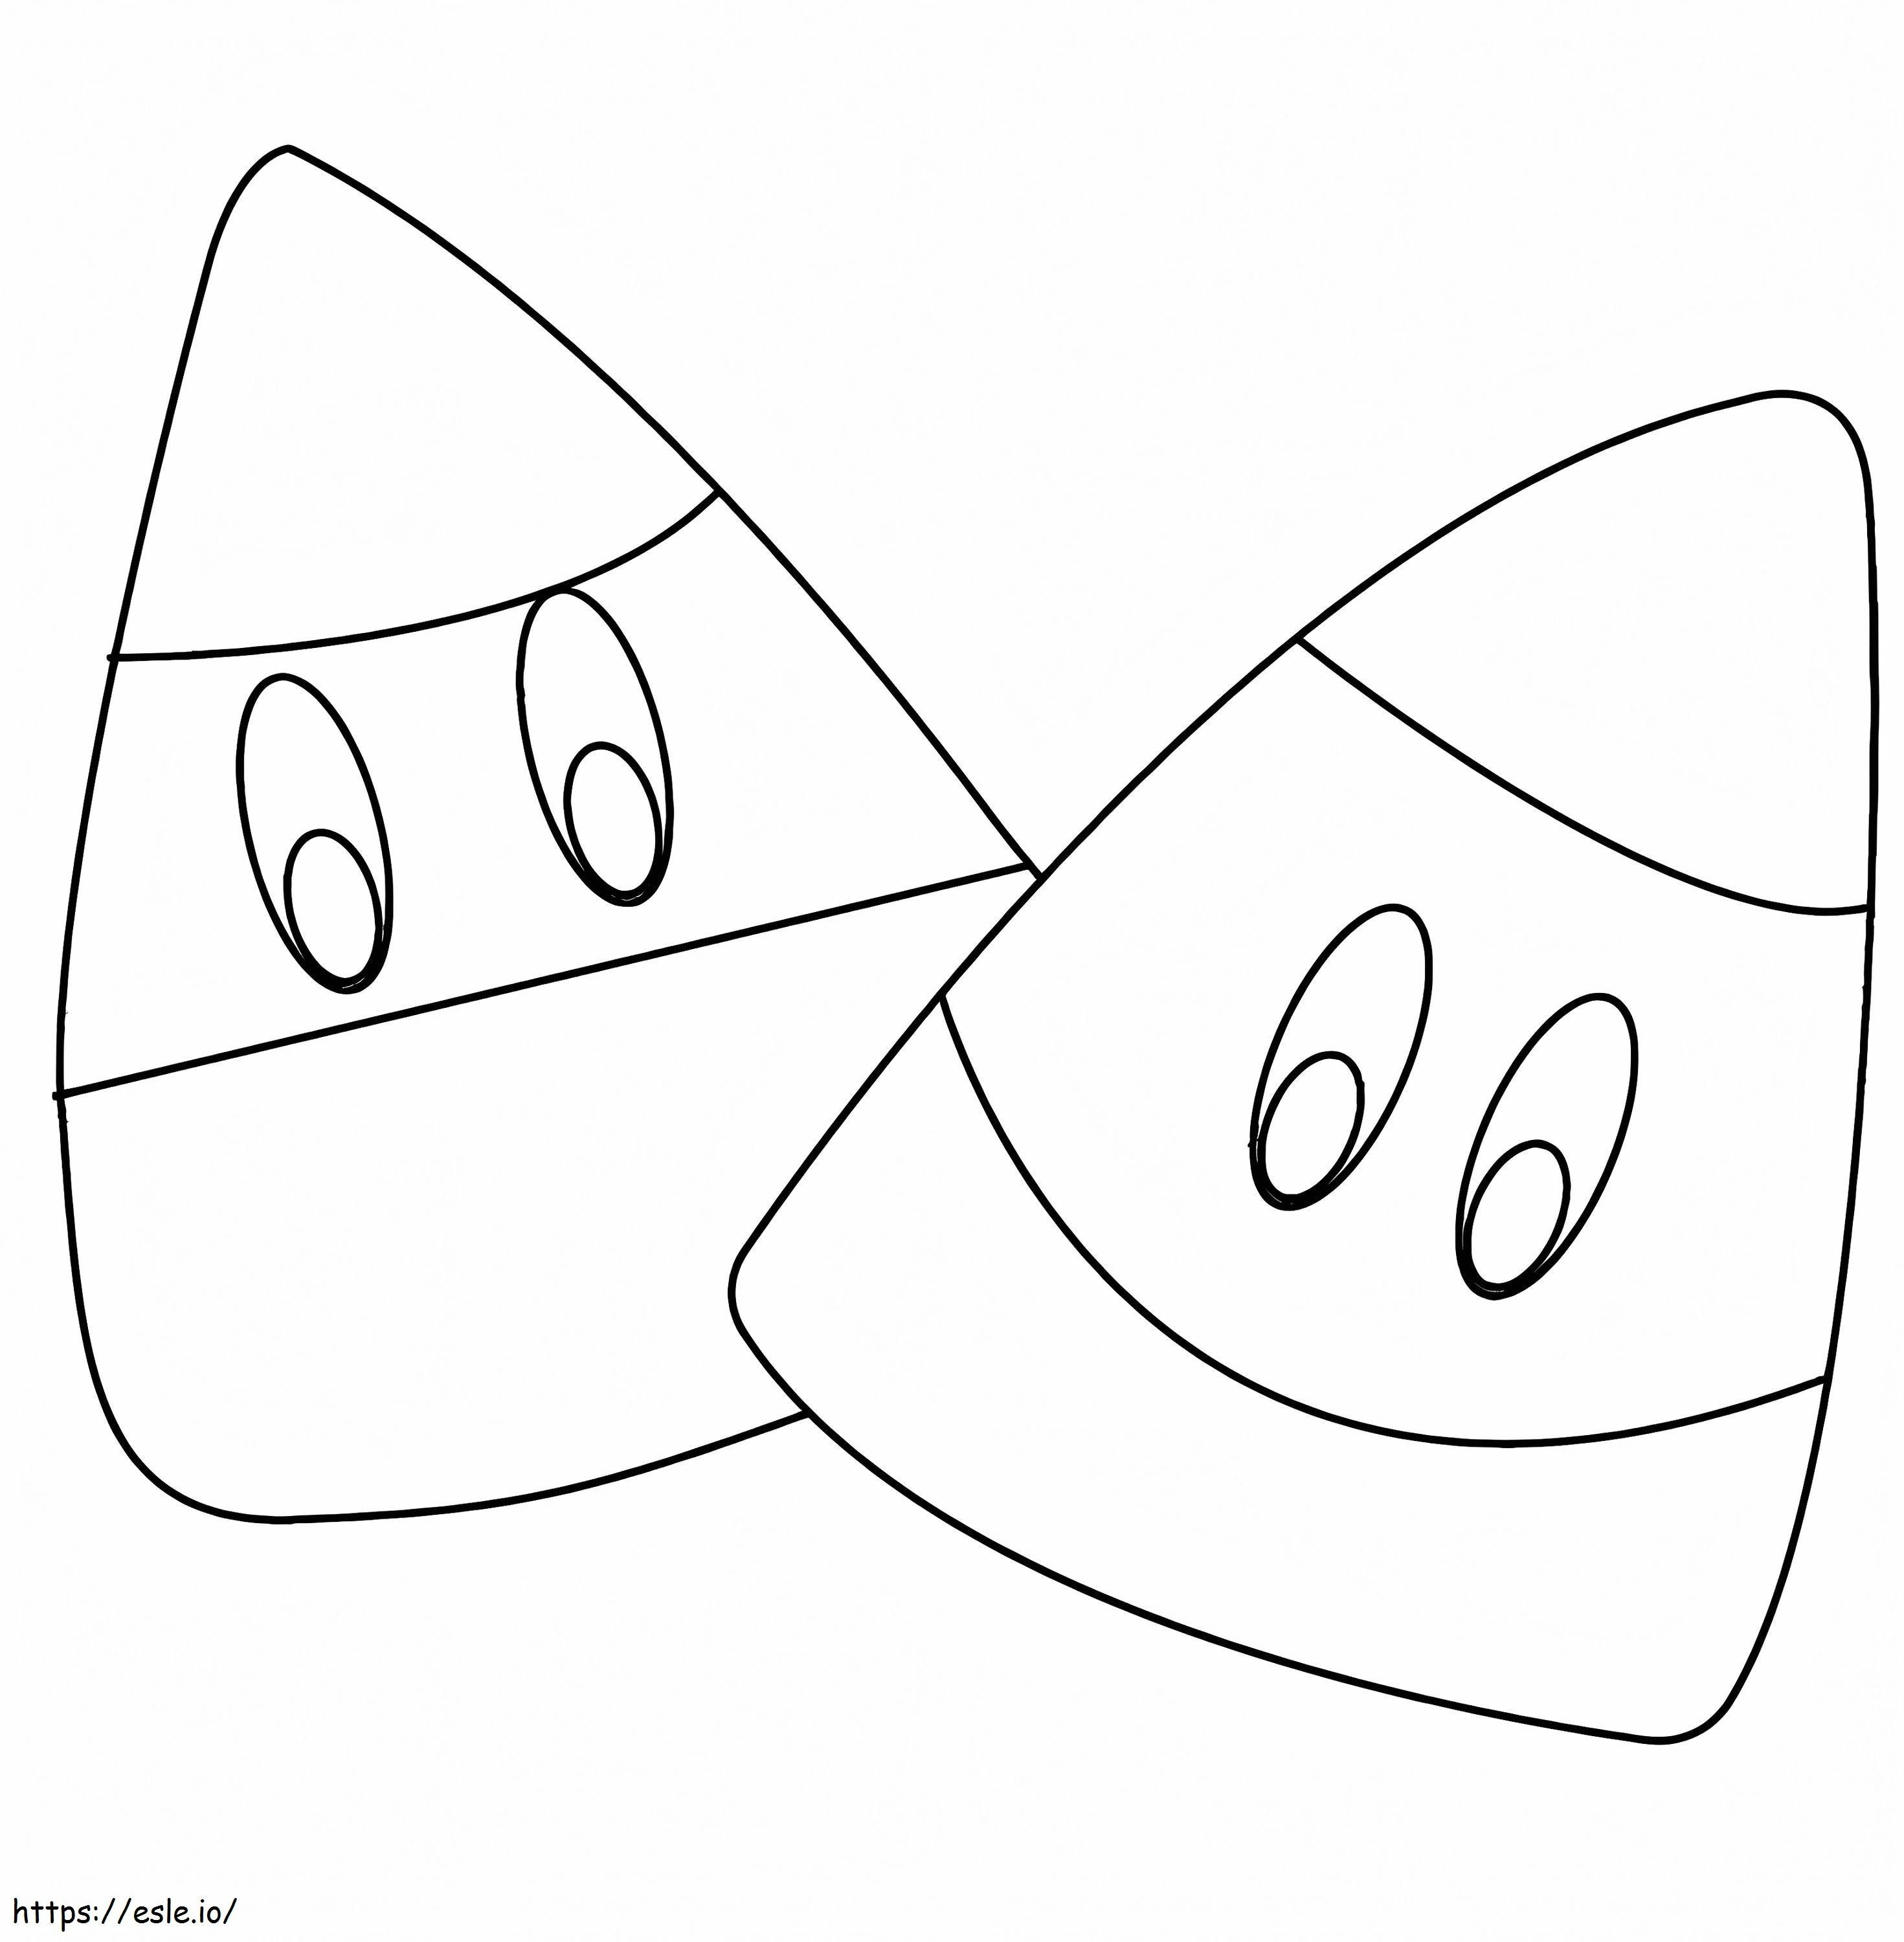 Two Cute Candy Corn coloring page